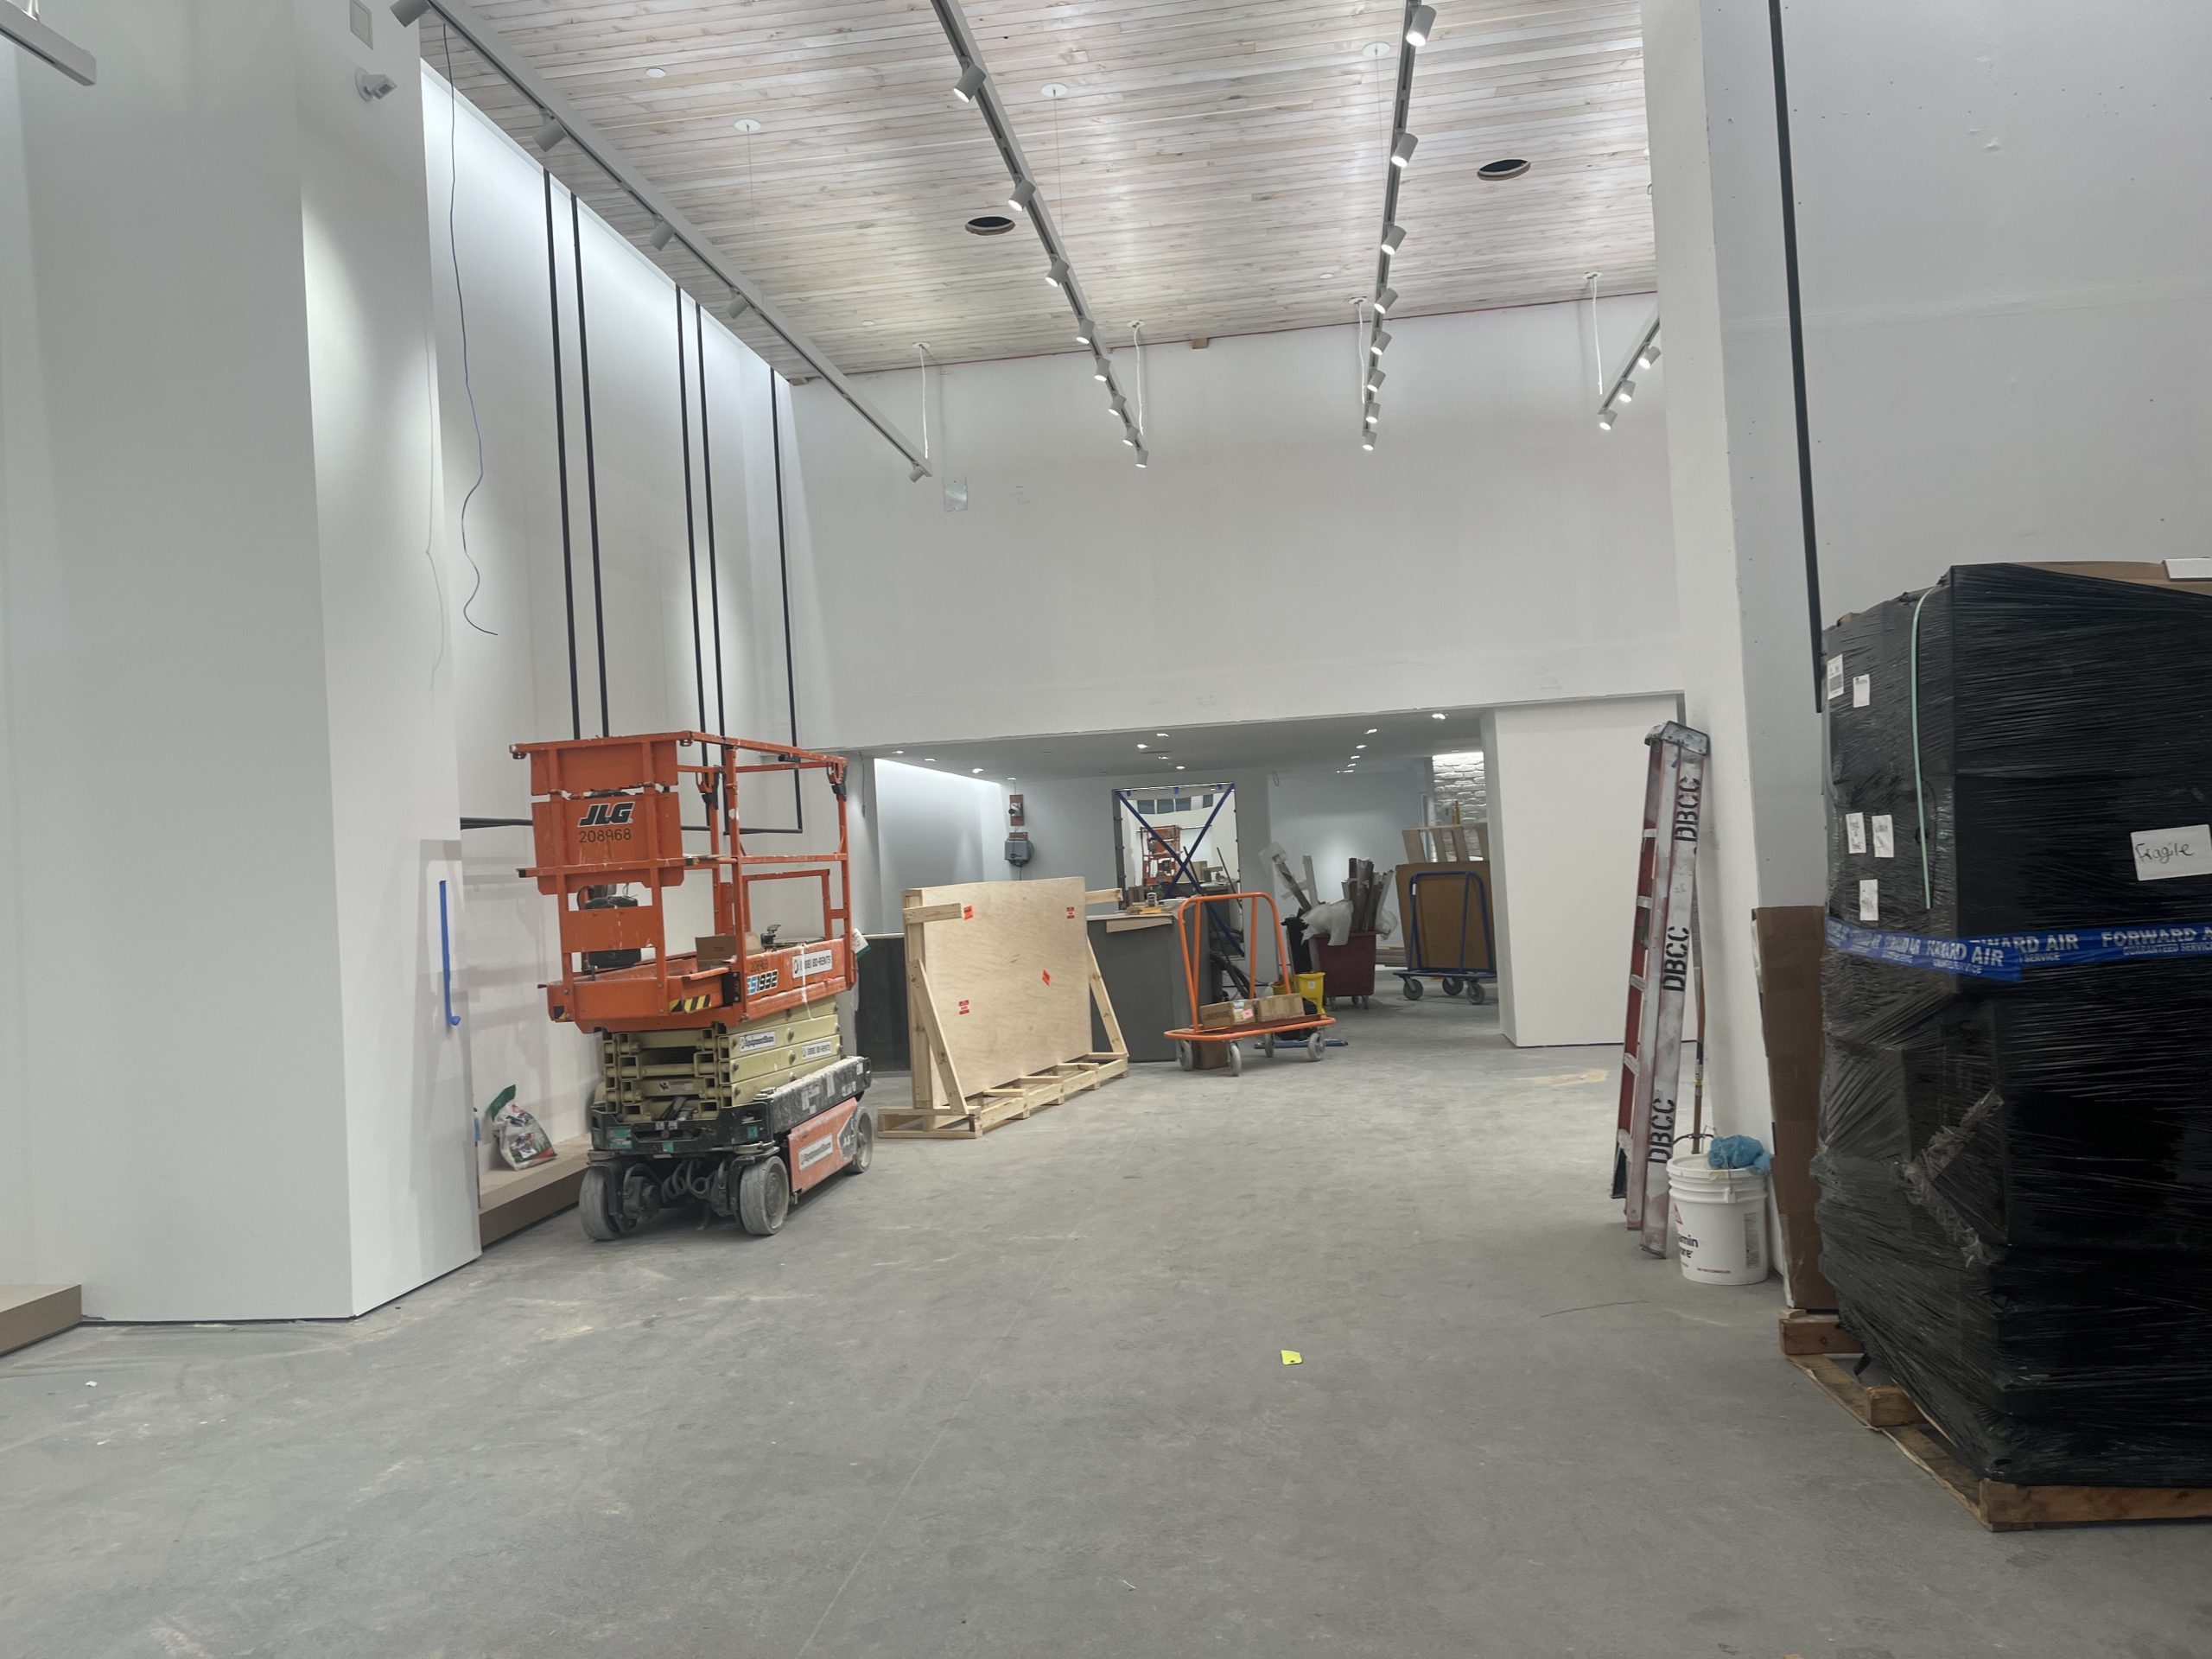 Construction Watch: The Wait For The Brand New Alo Yoga On Walnut